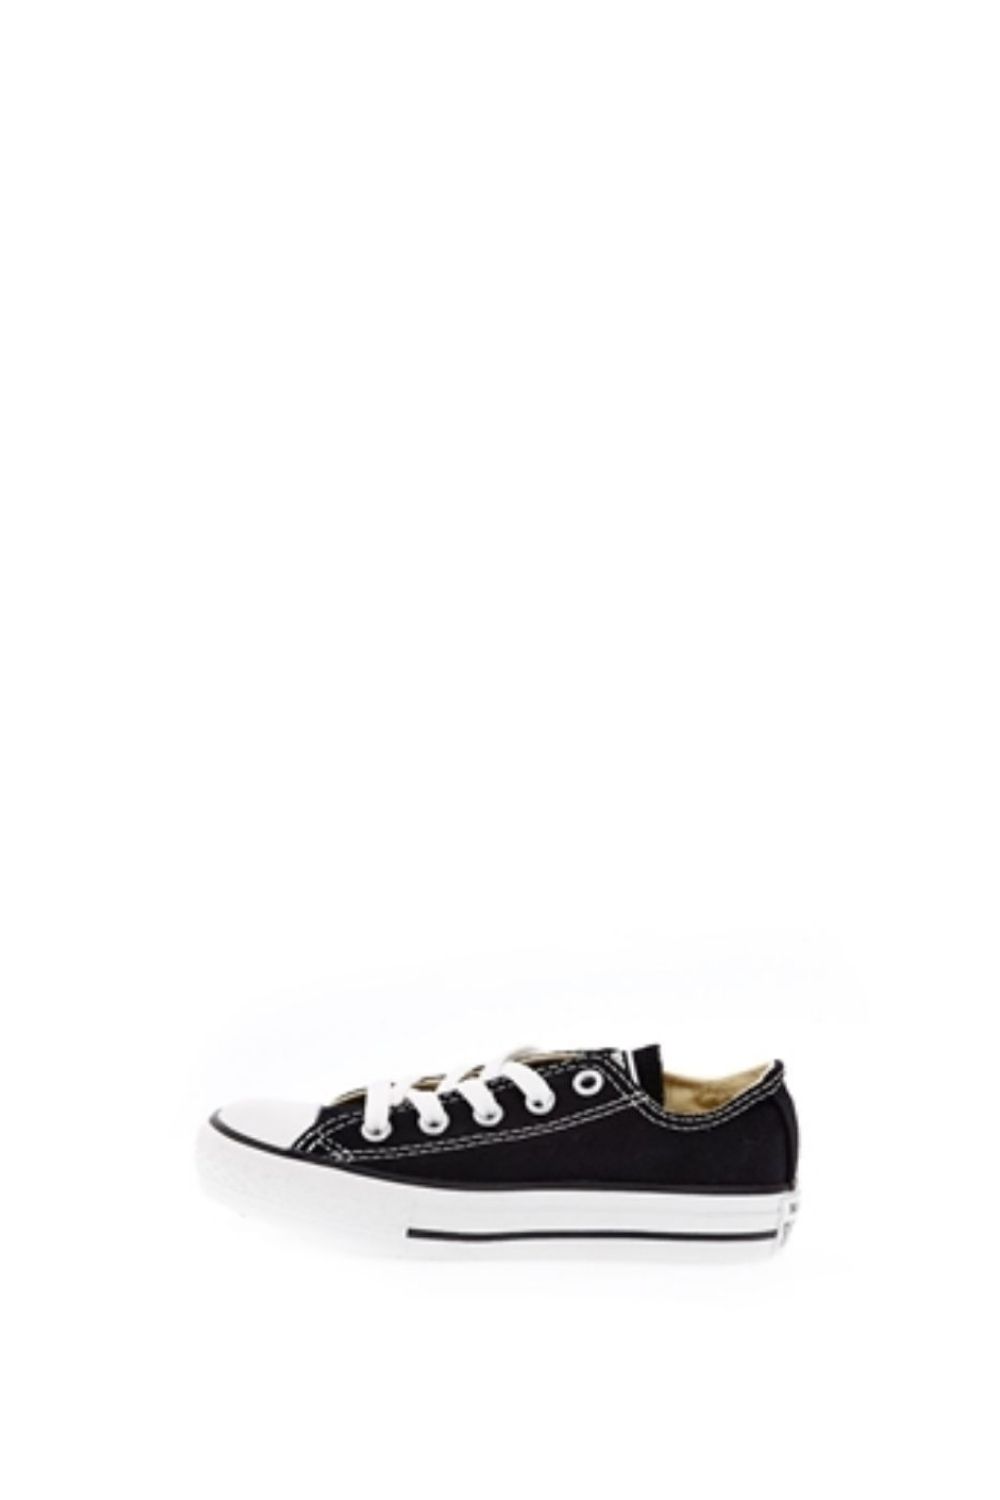 CONVERSE - Παιδικά παπούτσια Chuck Taylor All Star Ox μαύρα Παιδικά/Boys/Παπούτσια/Sneakers